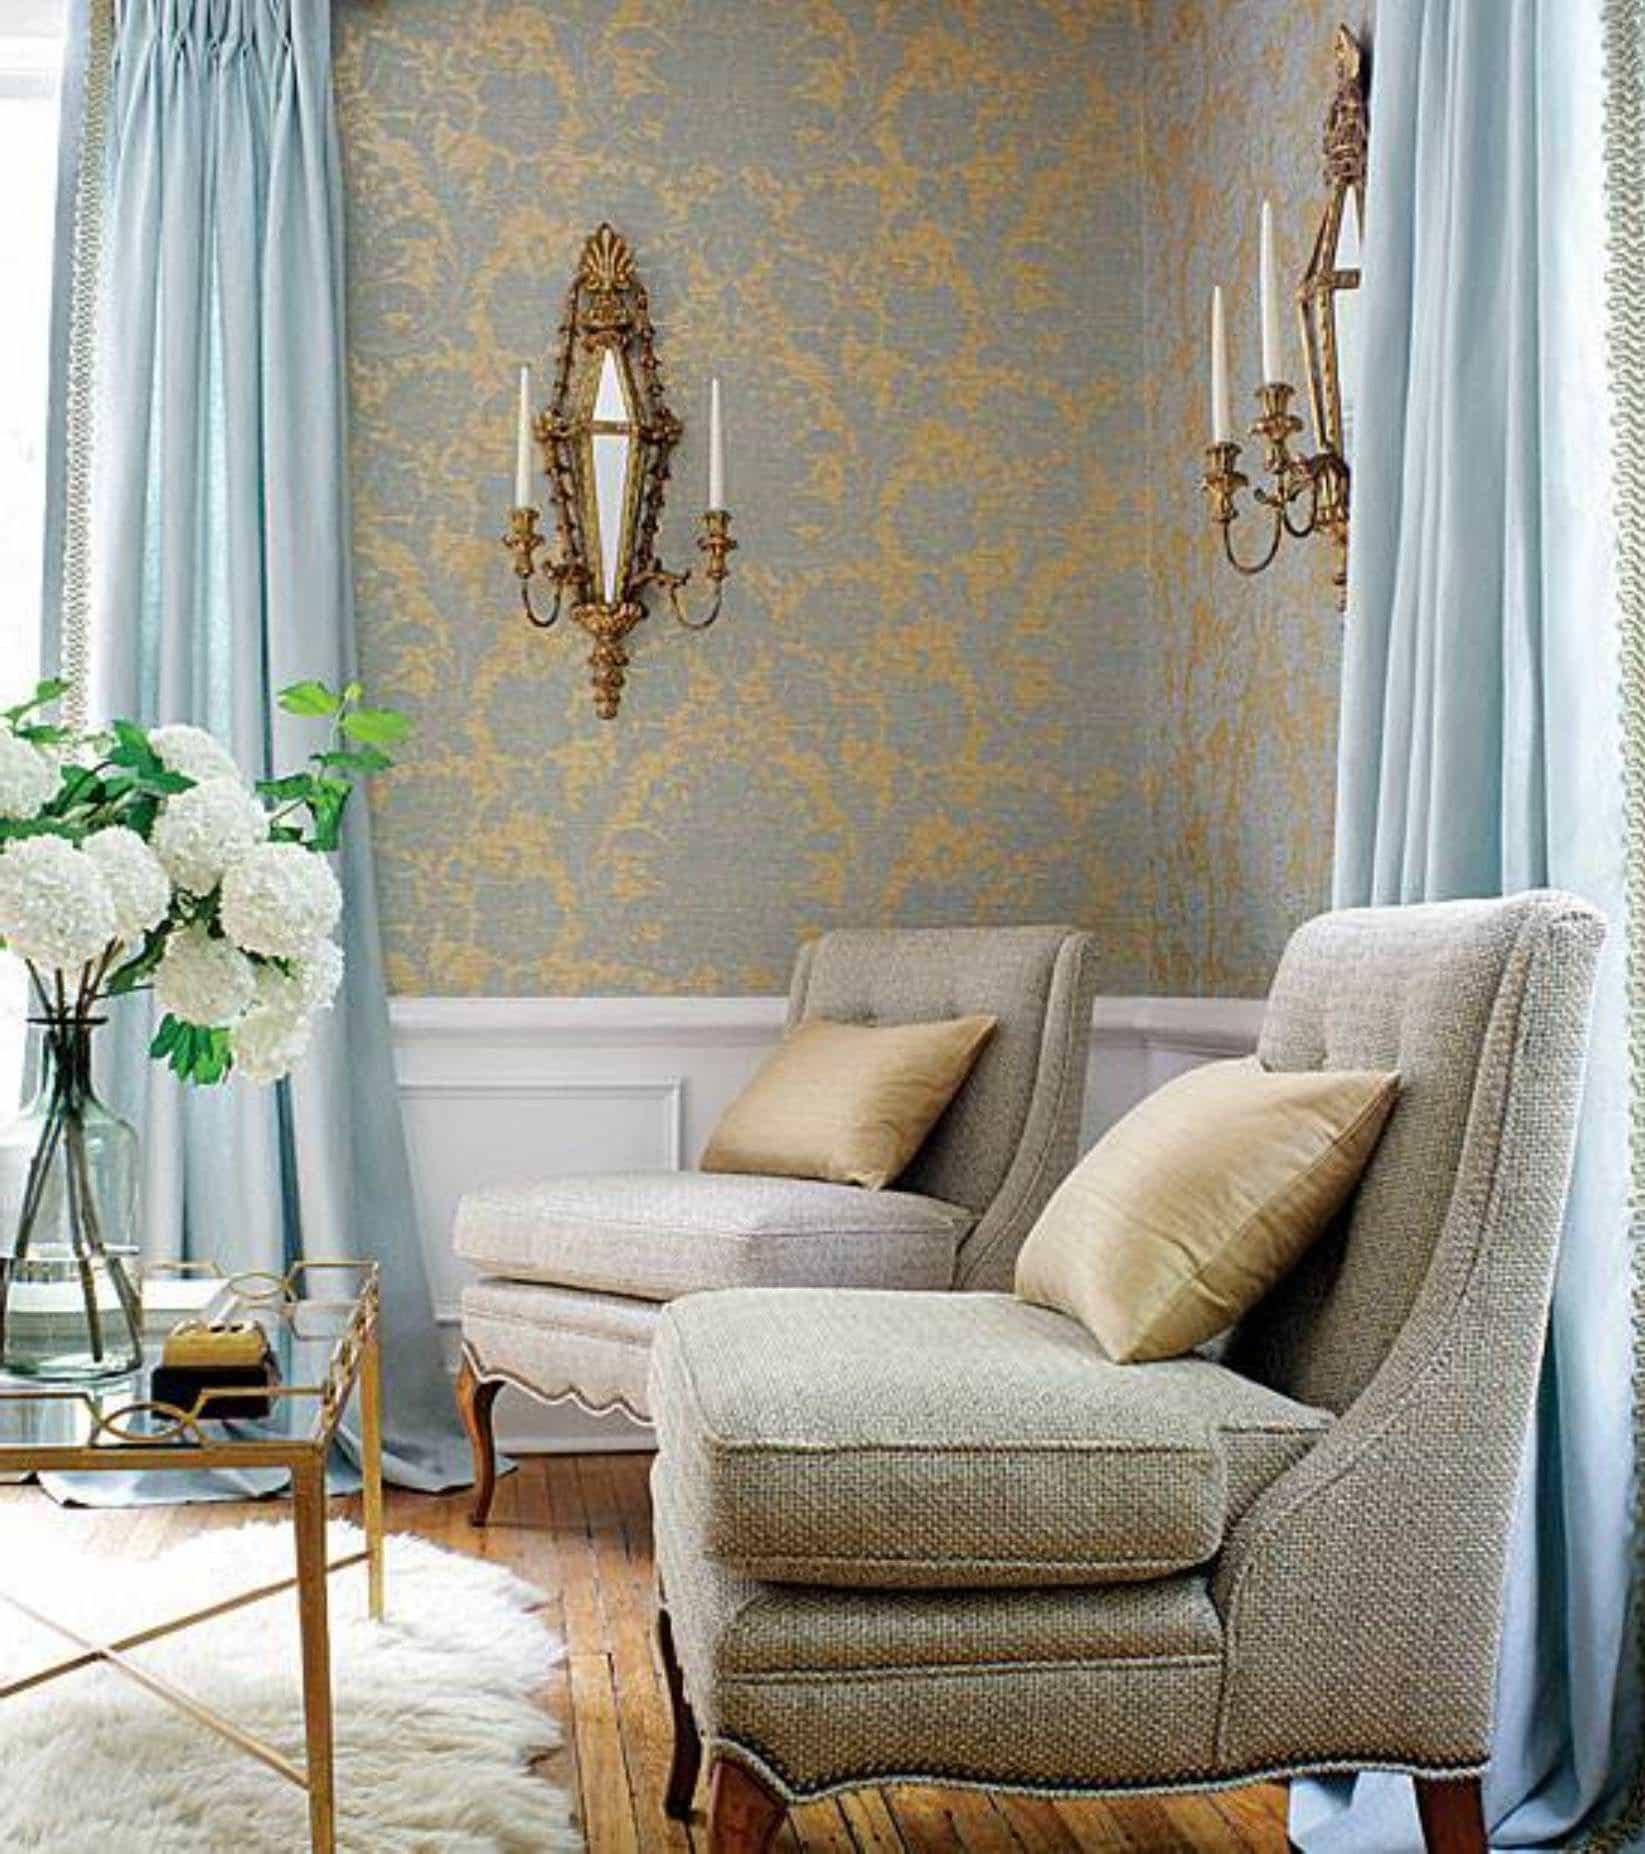 Wall Sconces Living Room
 Living Room Designed With Wallpaper And Candle Wall